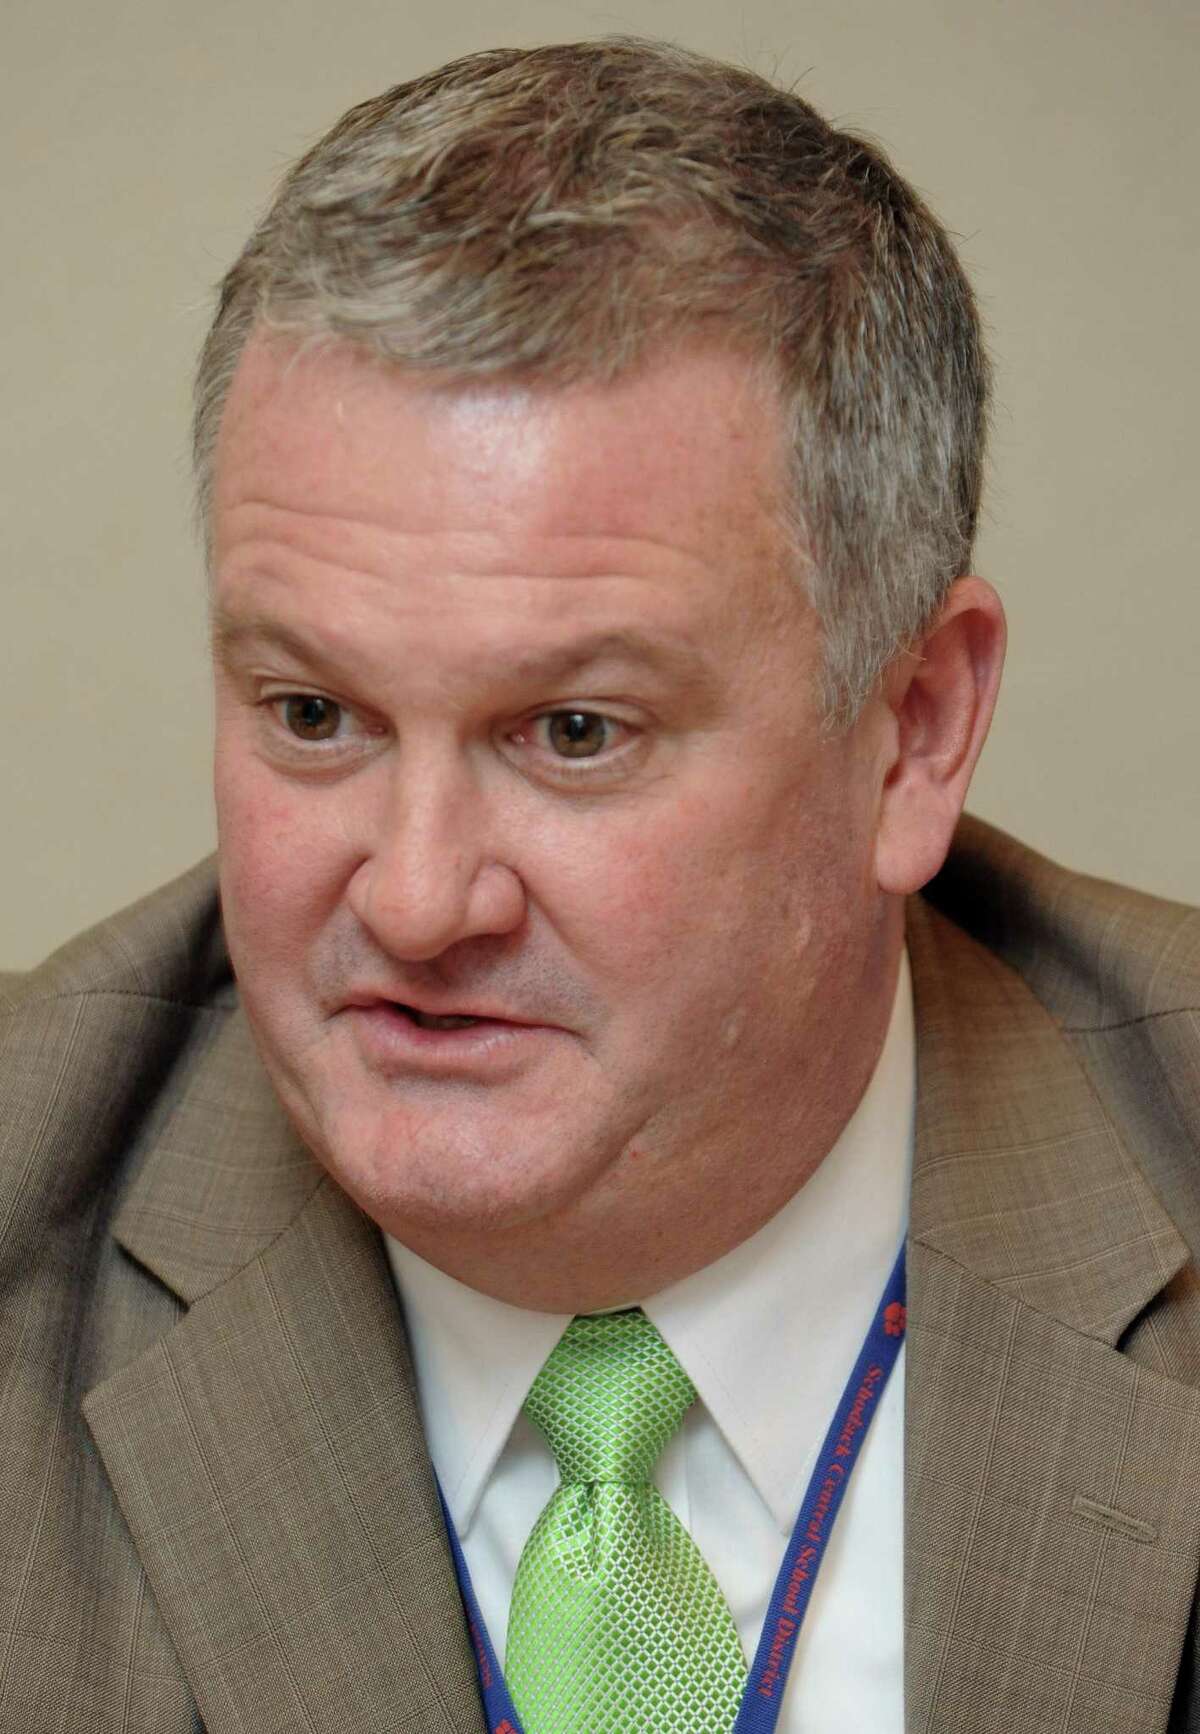 Bob Horan, Schodack schools superintendent, gives his perspective on the 2013 state budget on Thursday Jan. 31,2013 in Troy, N.Y. (Michael P. Farrell/Times Union)